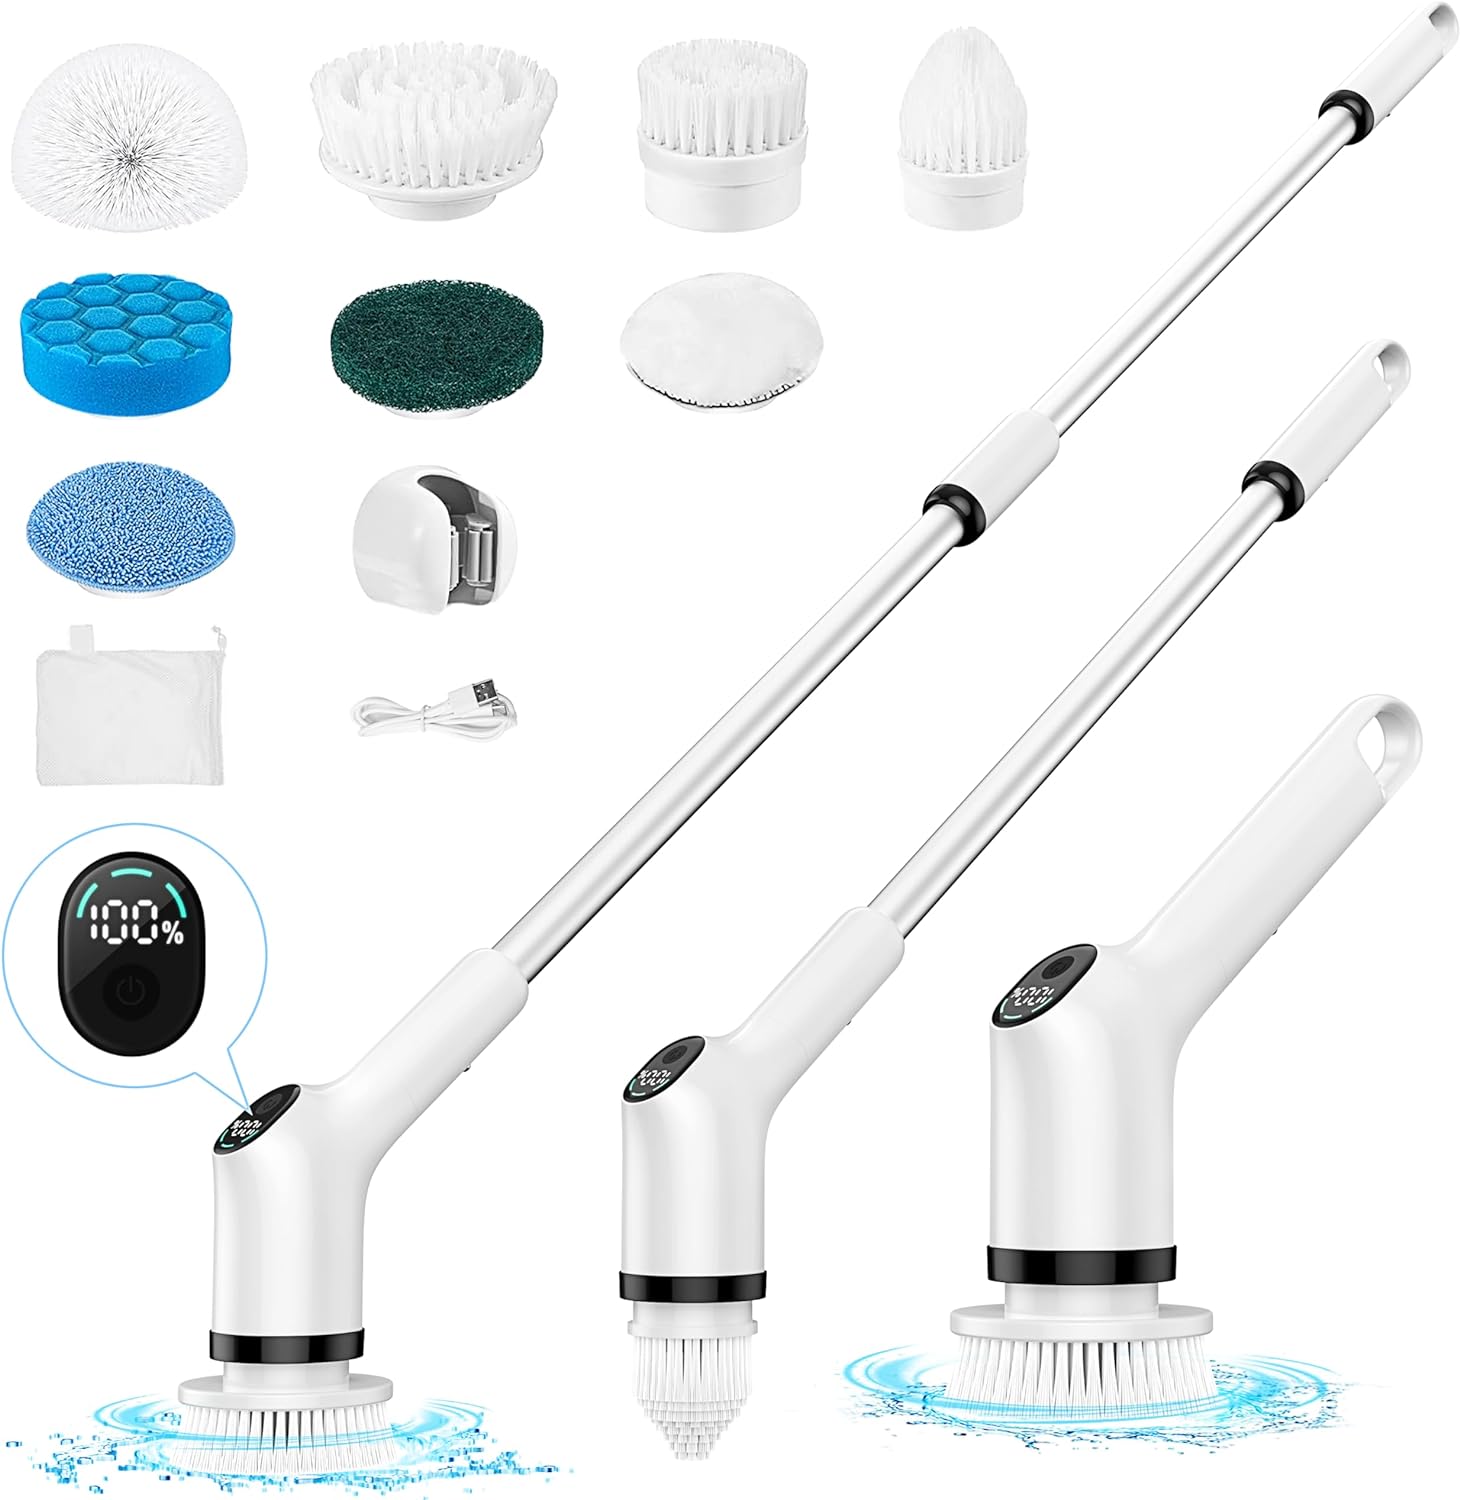 Electric Spin Scrubber, 4500mAh Battery Power Spin Scrubber, IP68  Professional Waterproof Spin Scrubber, 51 inch Cordless Household Cleaning  Brush